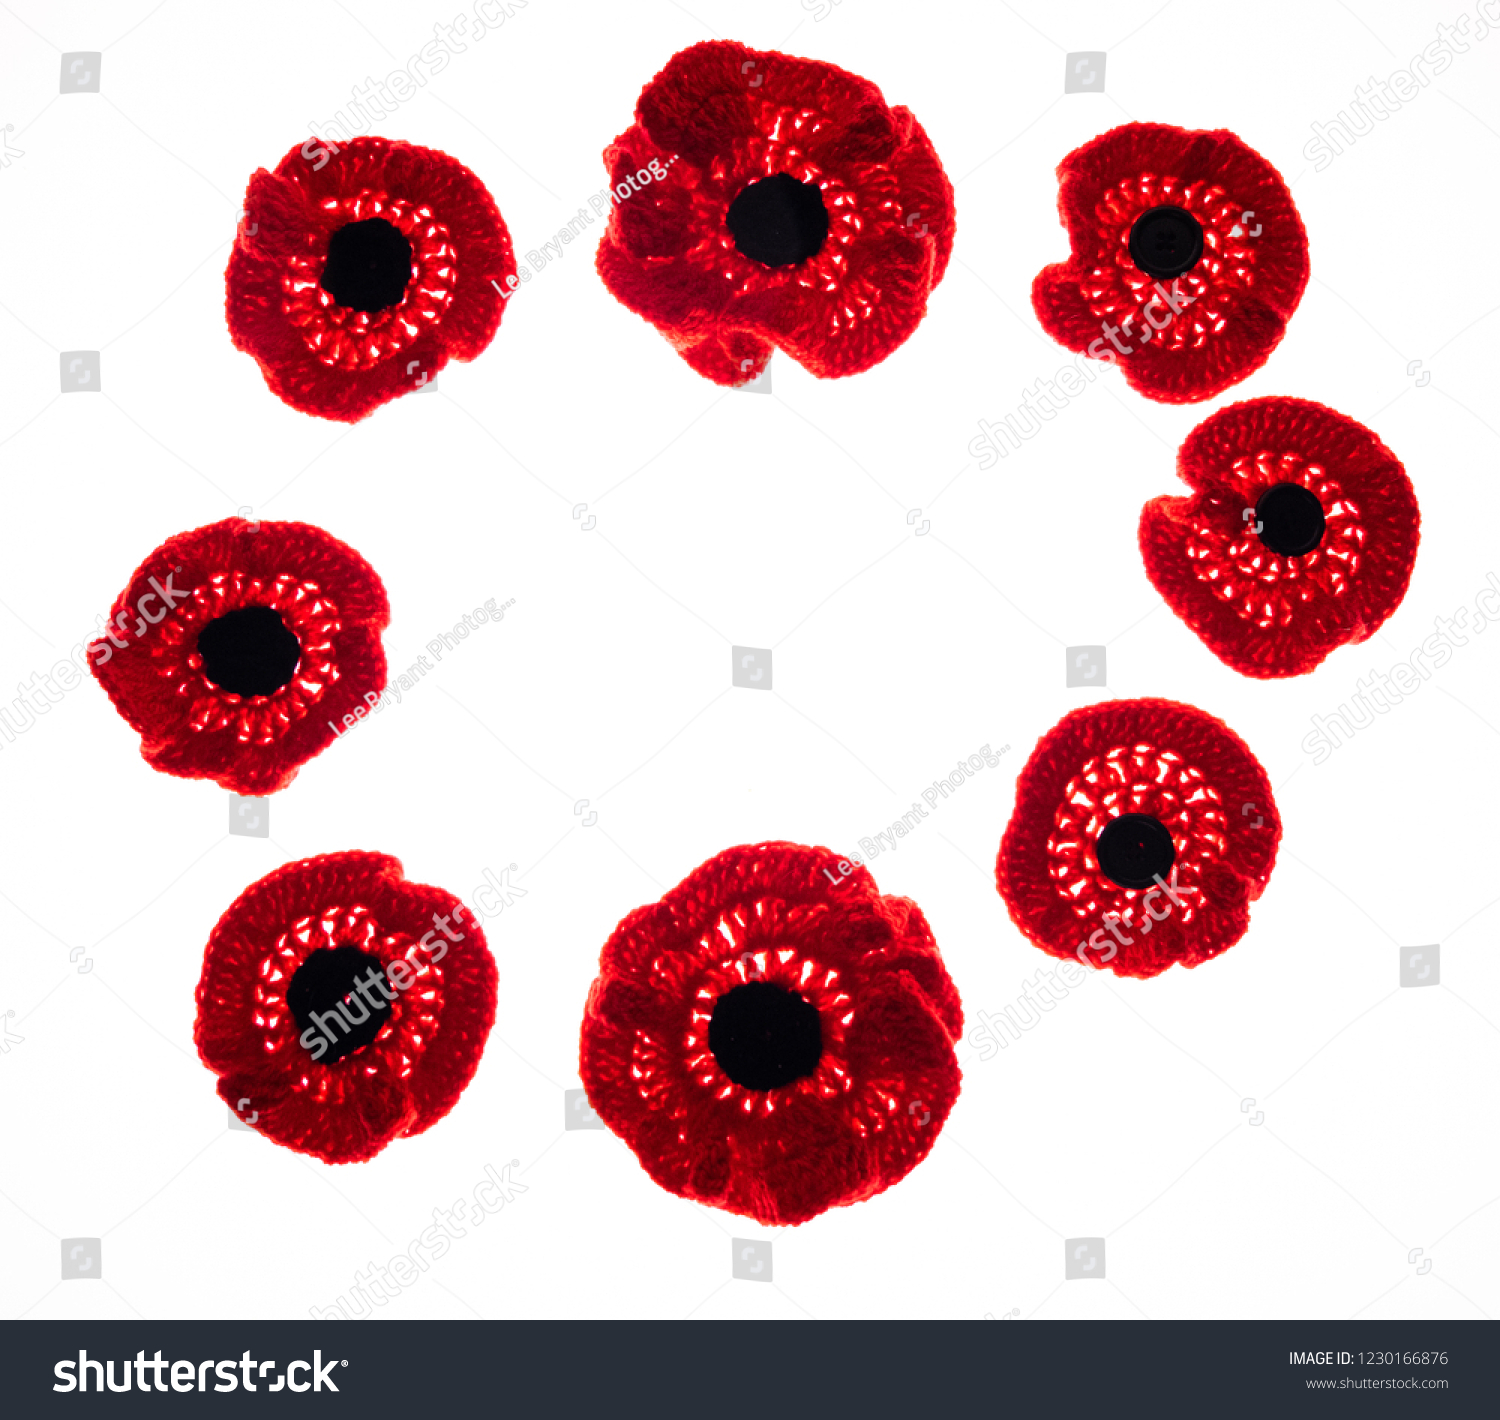 Collection Of Knitted Red Poppies Isolated On White Background #1230166876